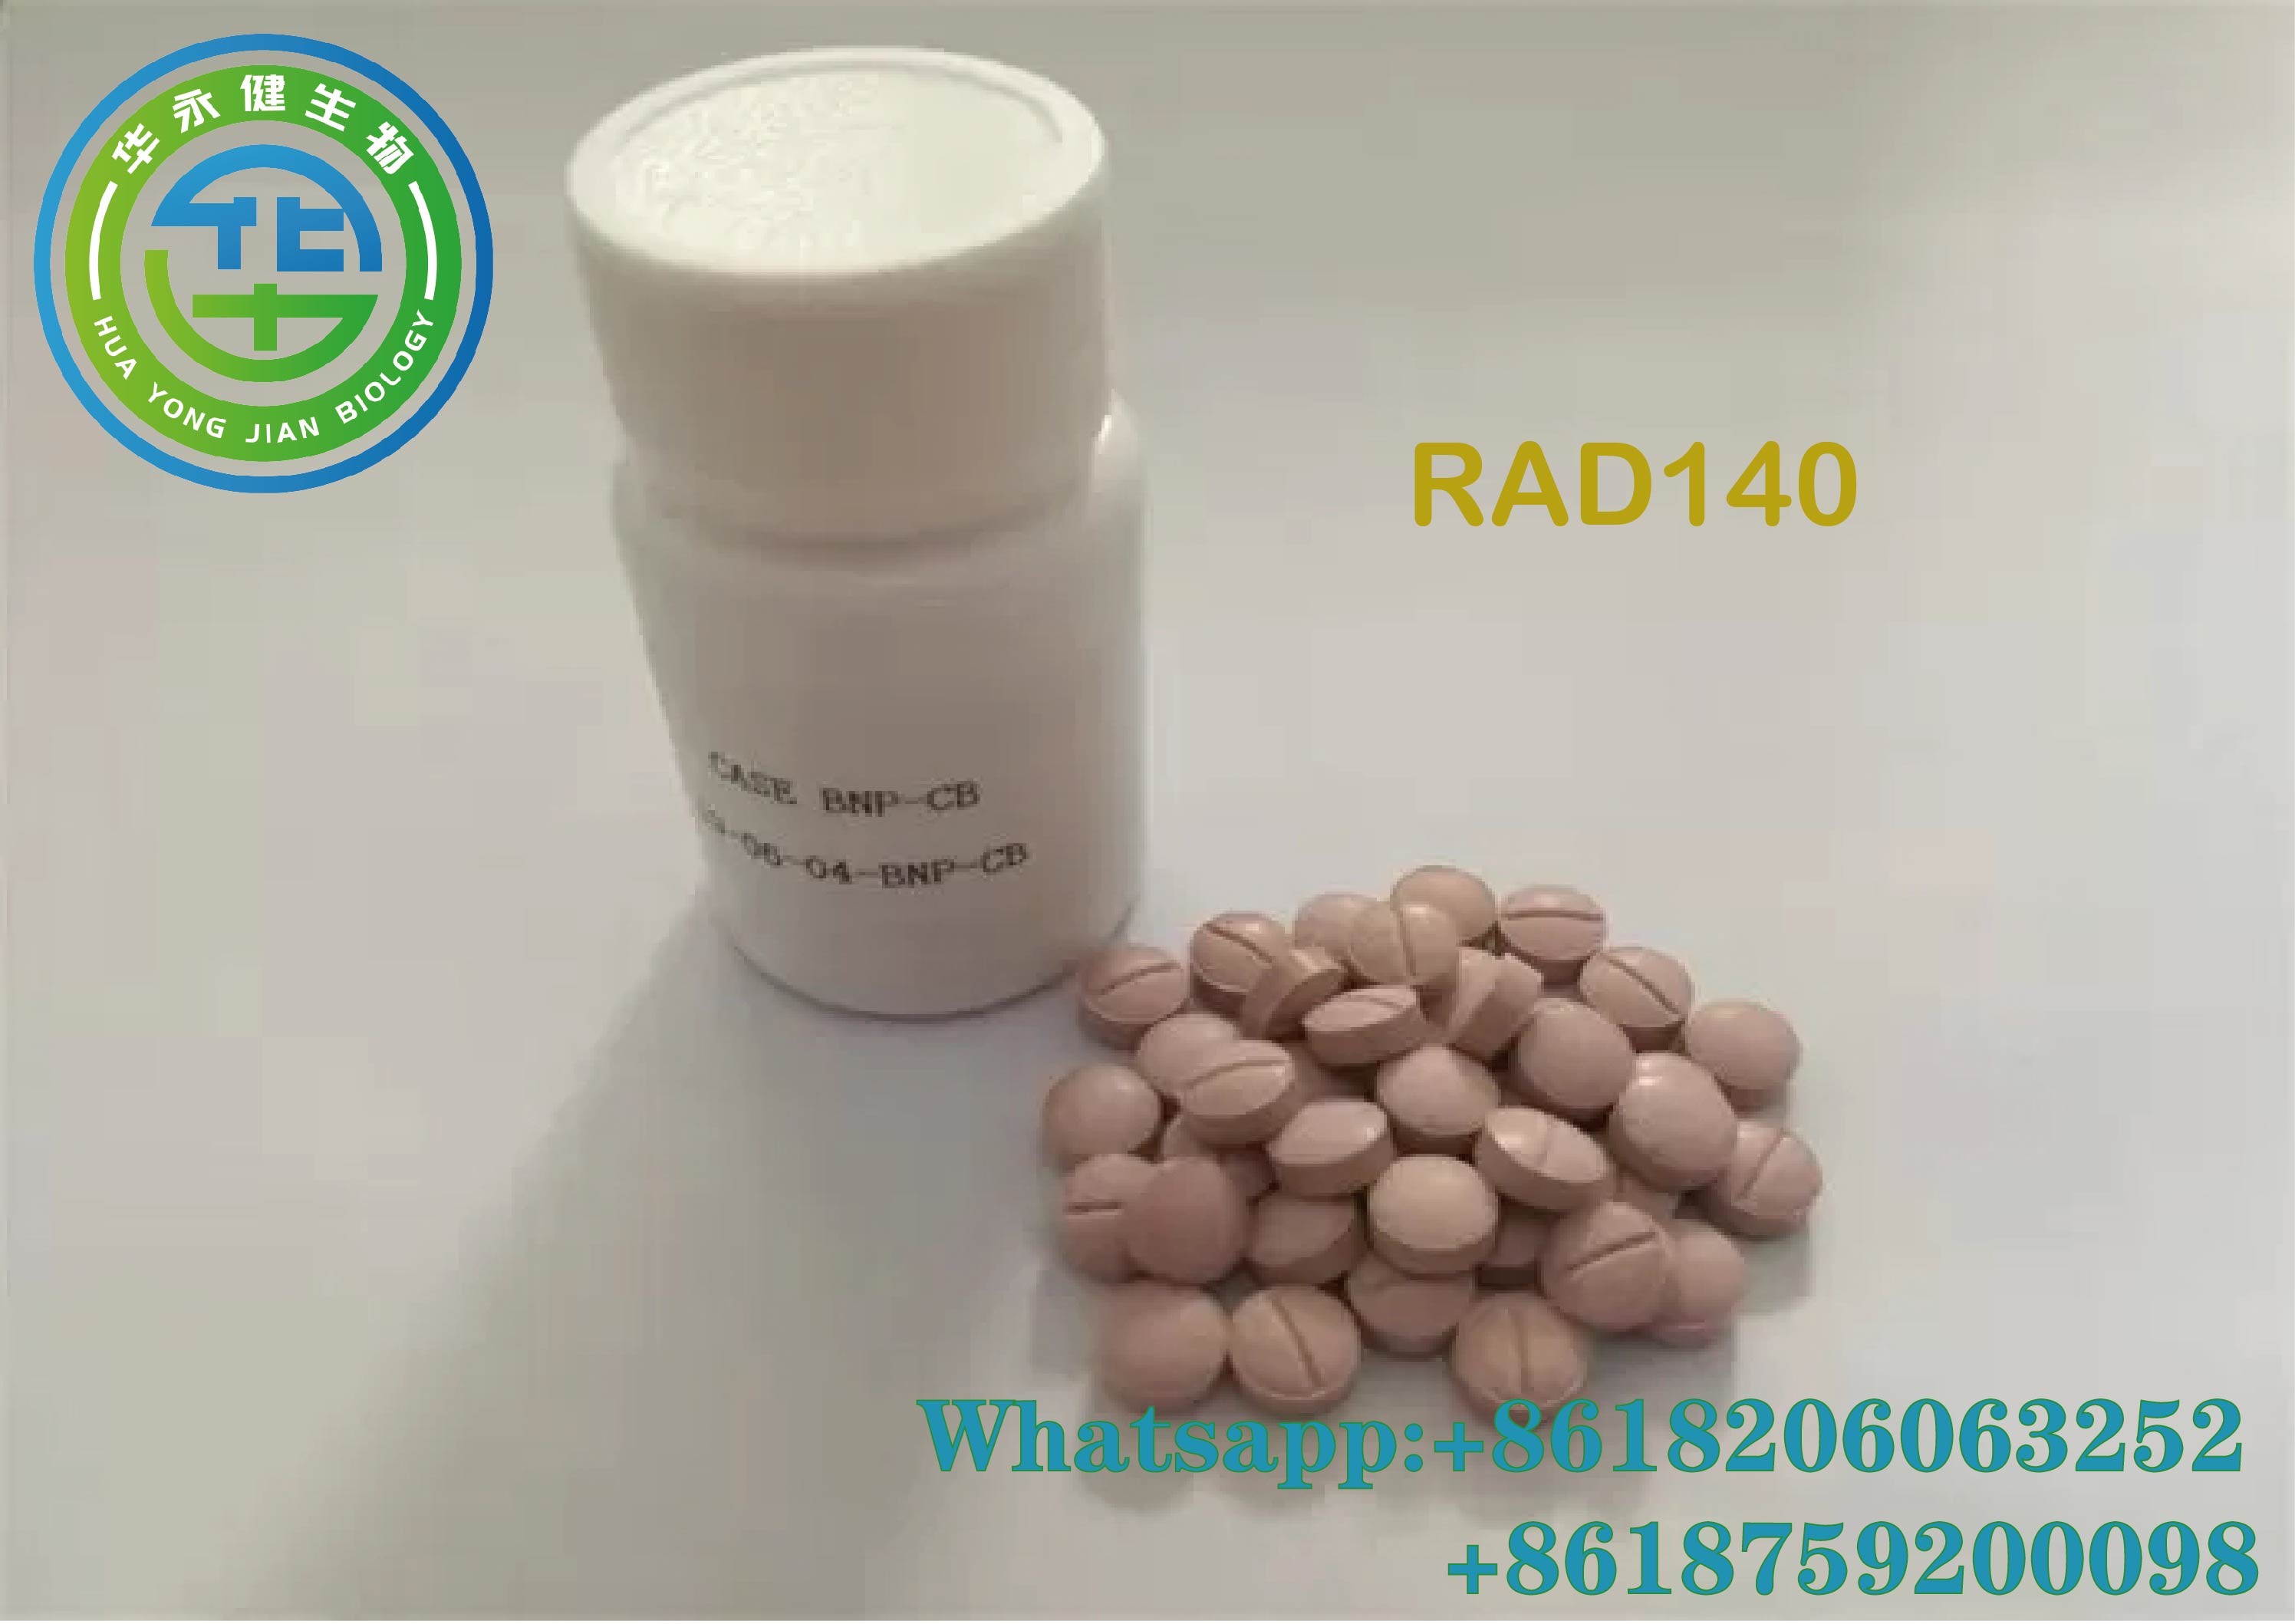 Wholesale Rad 140 Sarms Tablets Bodybuilding 10mg Bulking Cas 118237-47-0 from china suppliers